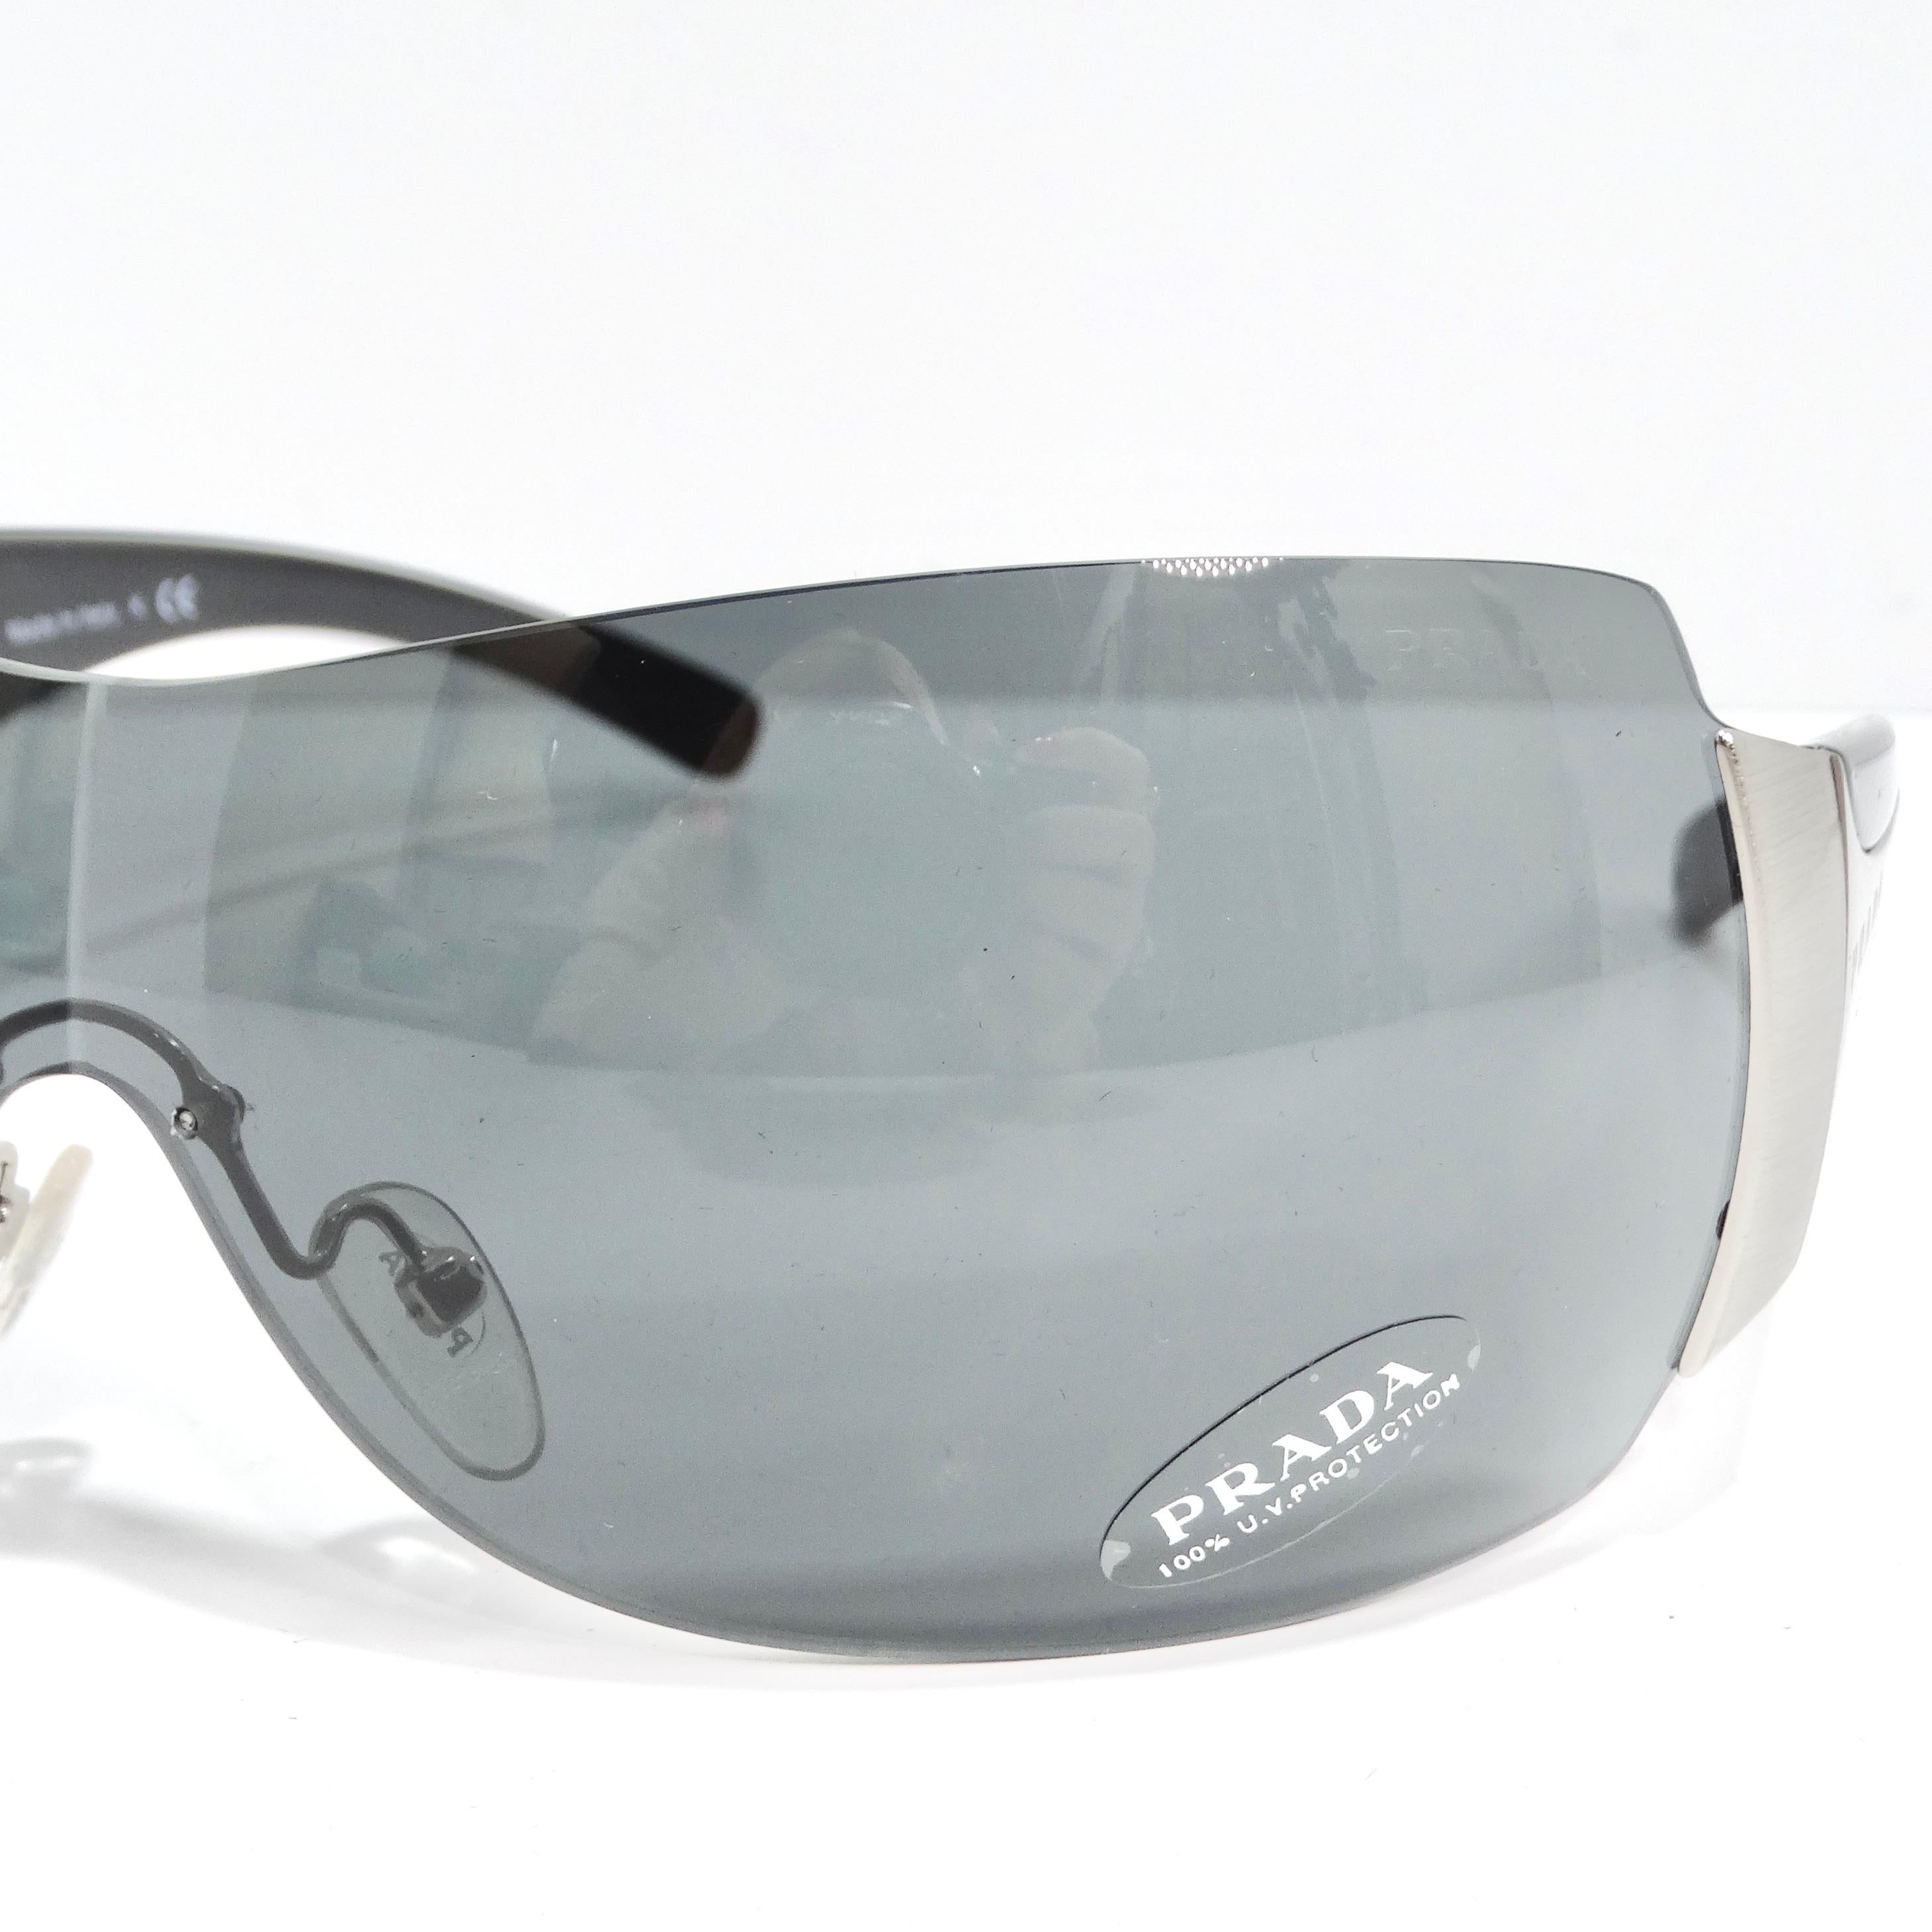 Step into the epitome of 1990s chic with the Prada 1990s Silver Tone Shield Sunglasses. These classic shield-style sunglasses boast thin silver-tone rims, sleek black arms adorned with silver-tone Prada logos, and stylish blue-grey lenses. The